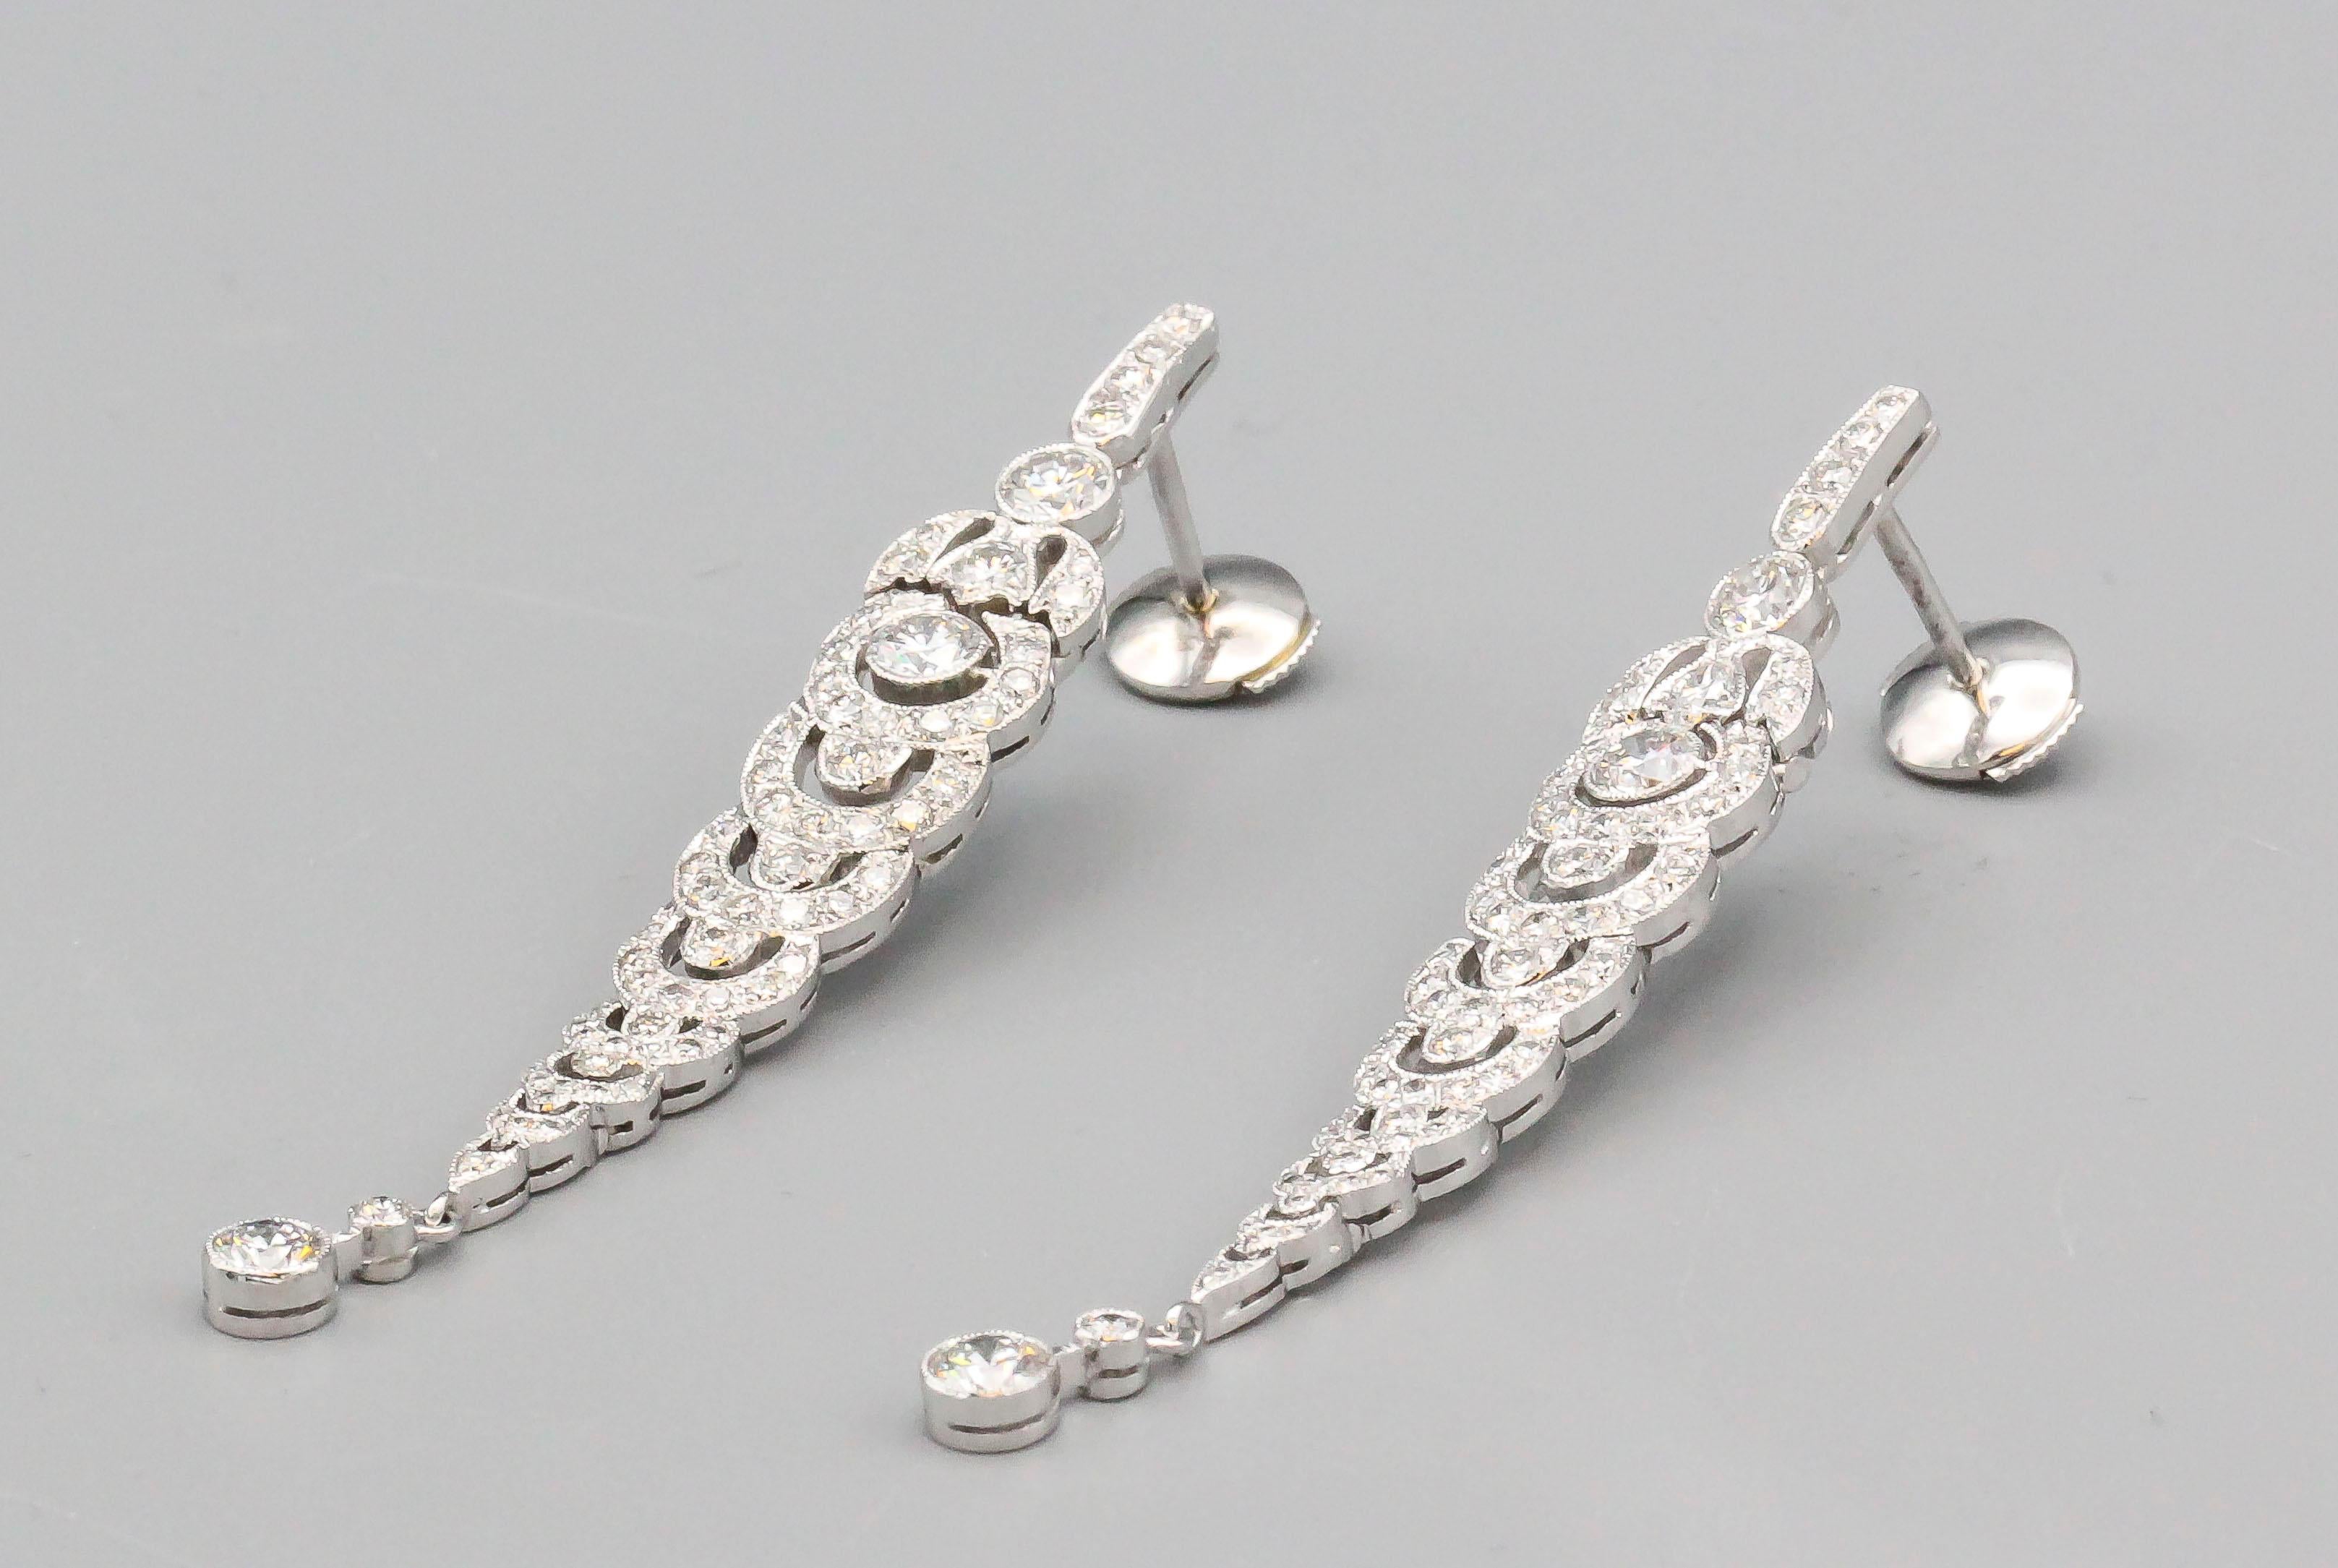 Fine pair of estate diamond and platinum drop earrings of French origin.  They feature high grade round brilliant cut diamonds of approx. 3-4 carats total weight. 

Hallmarks: French 18k gold assay marks